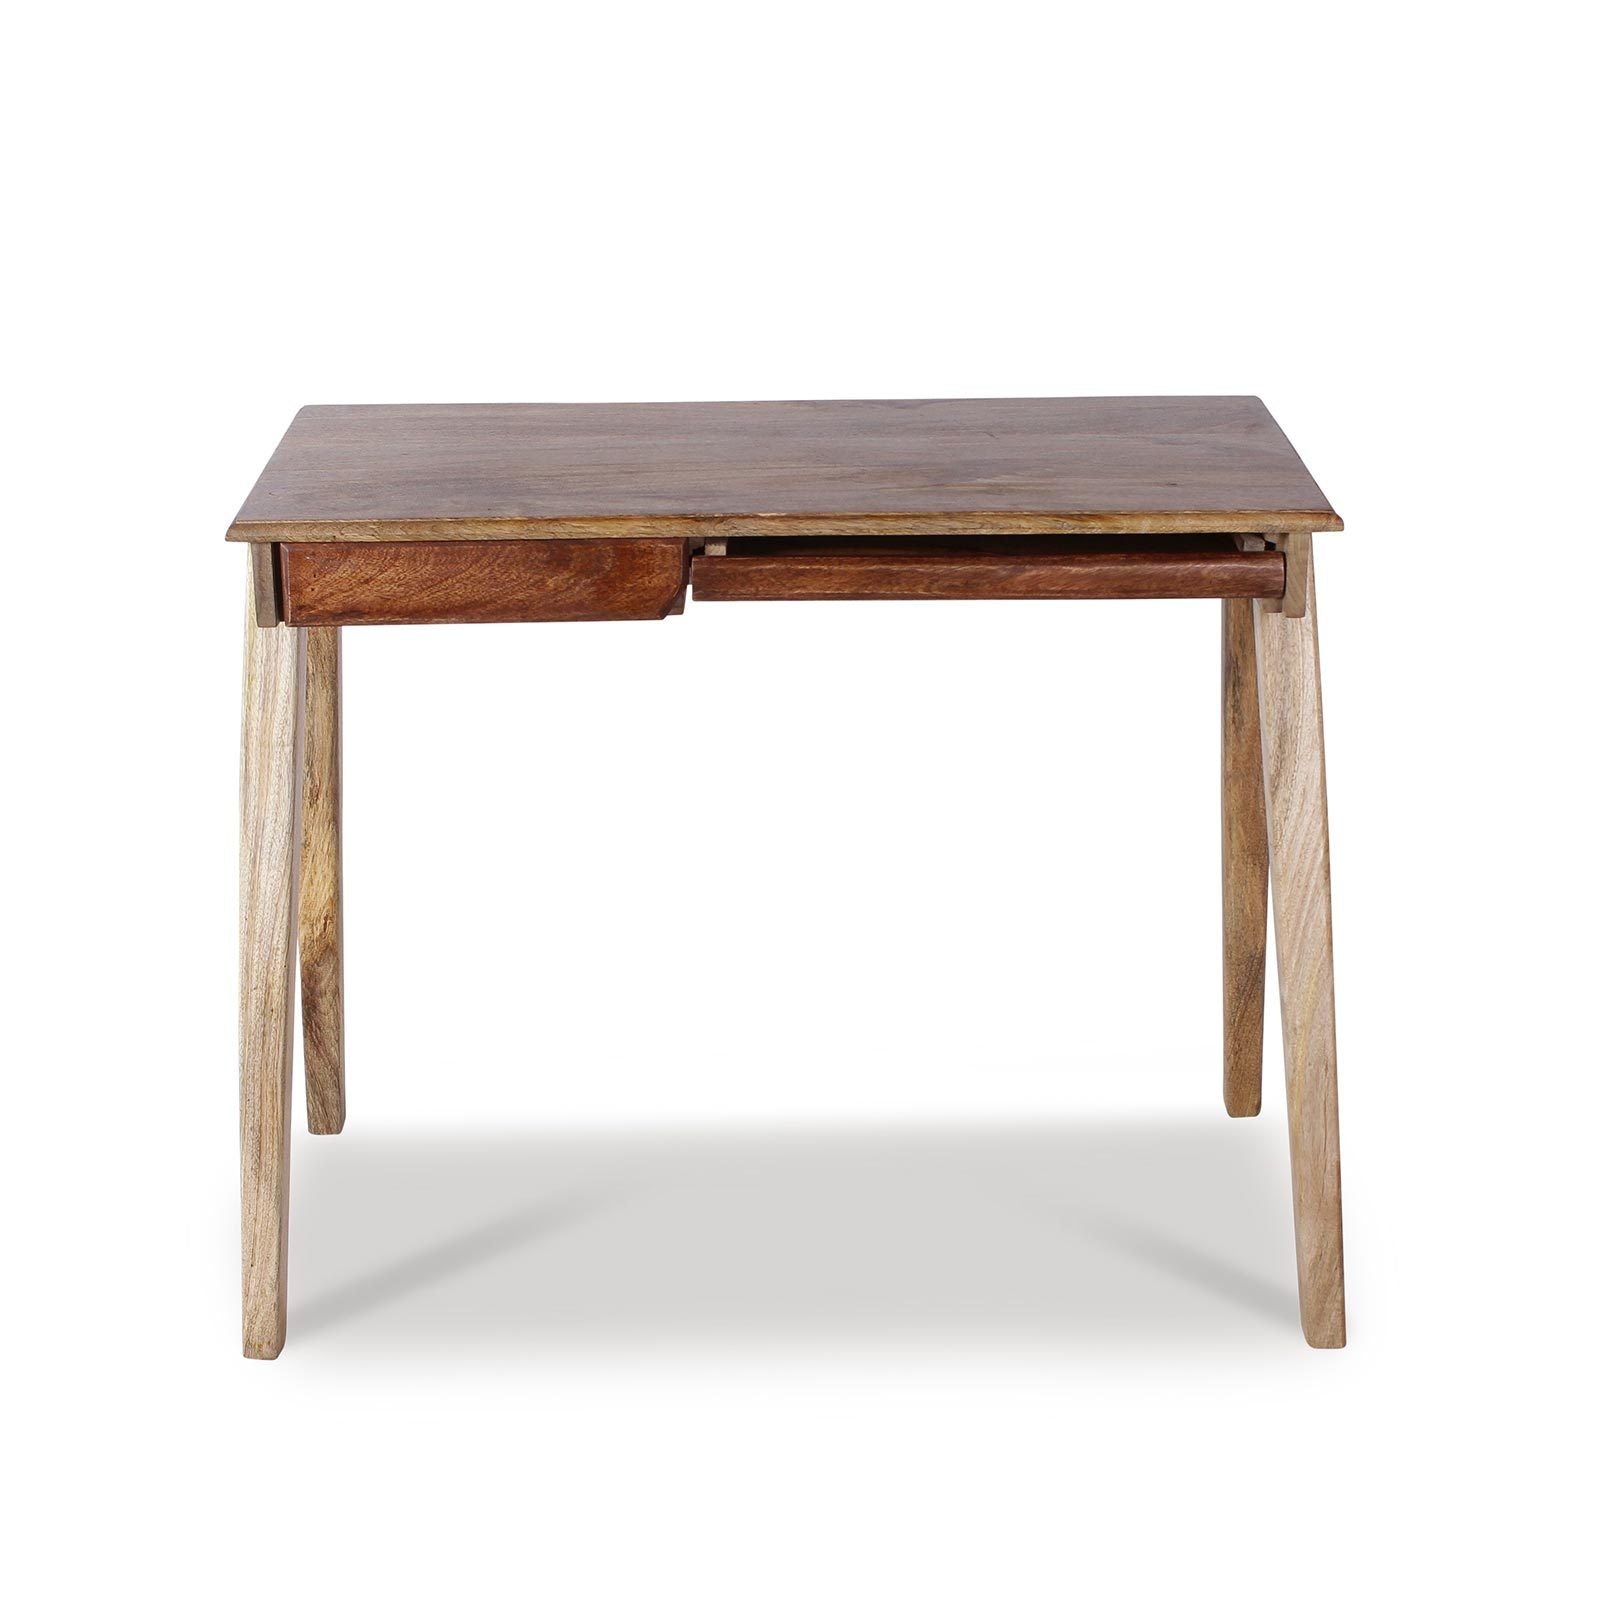 Buy Remy Solid Wood Study Tables online